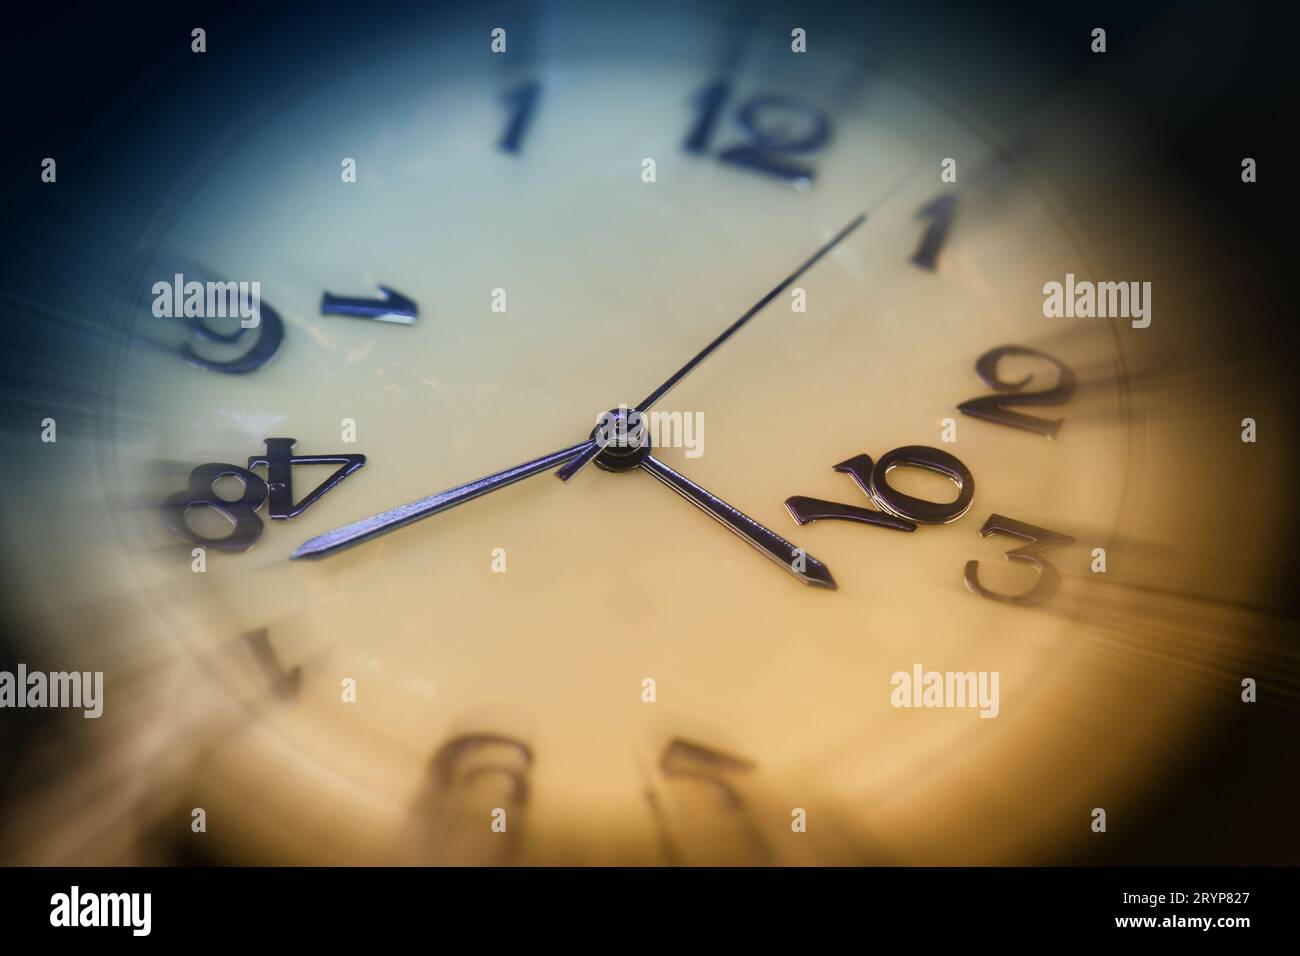 Wristwatch dial with blue hands and crumbling numbers and motion blur effect. Macro photography. Concept of the passage of time, aging Stock Photo